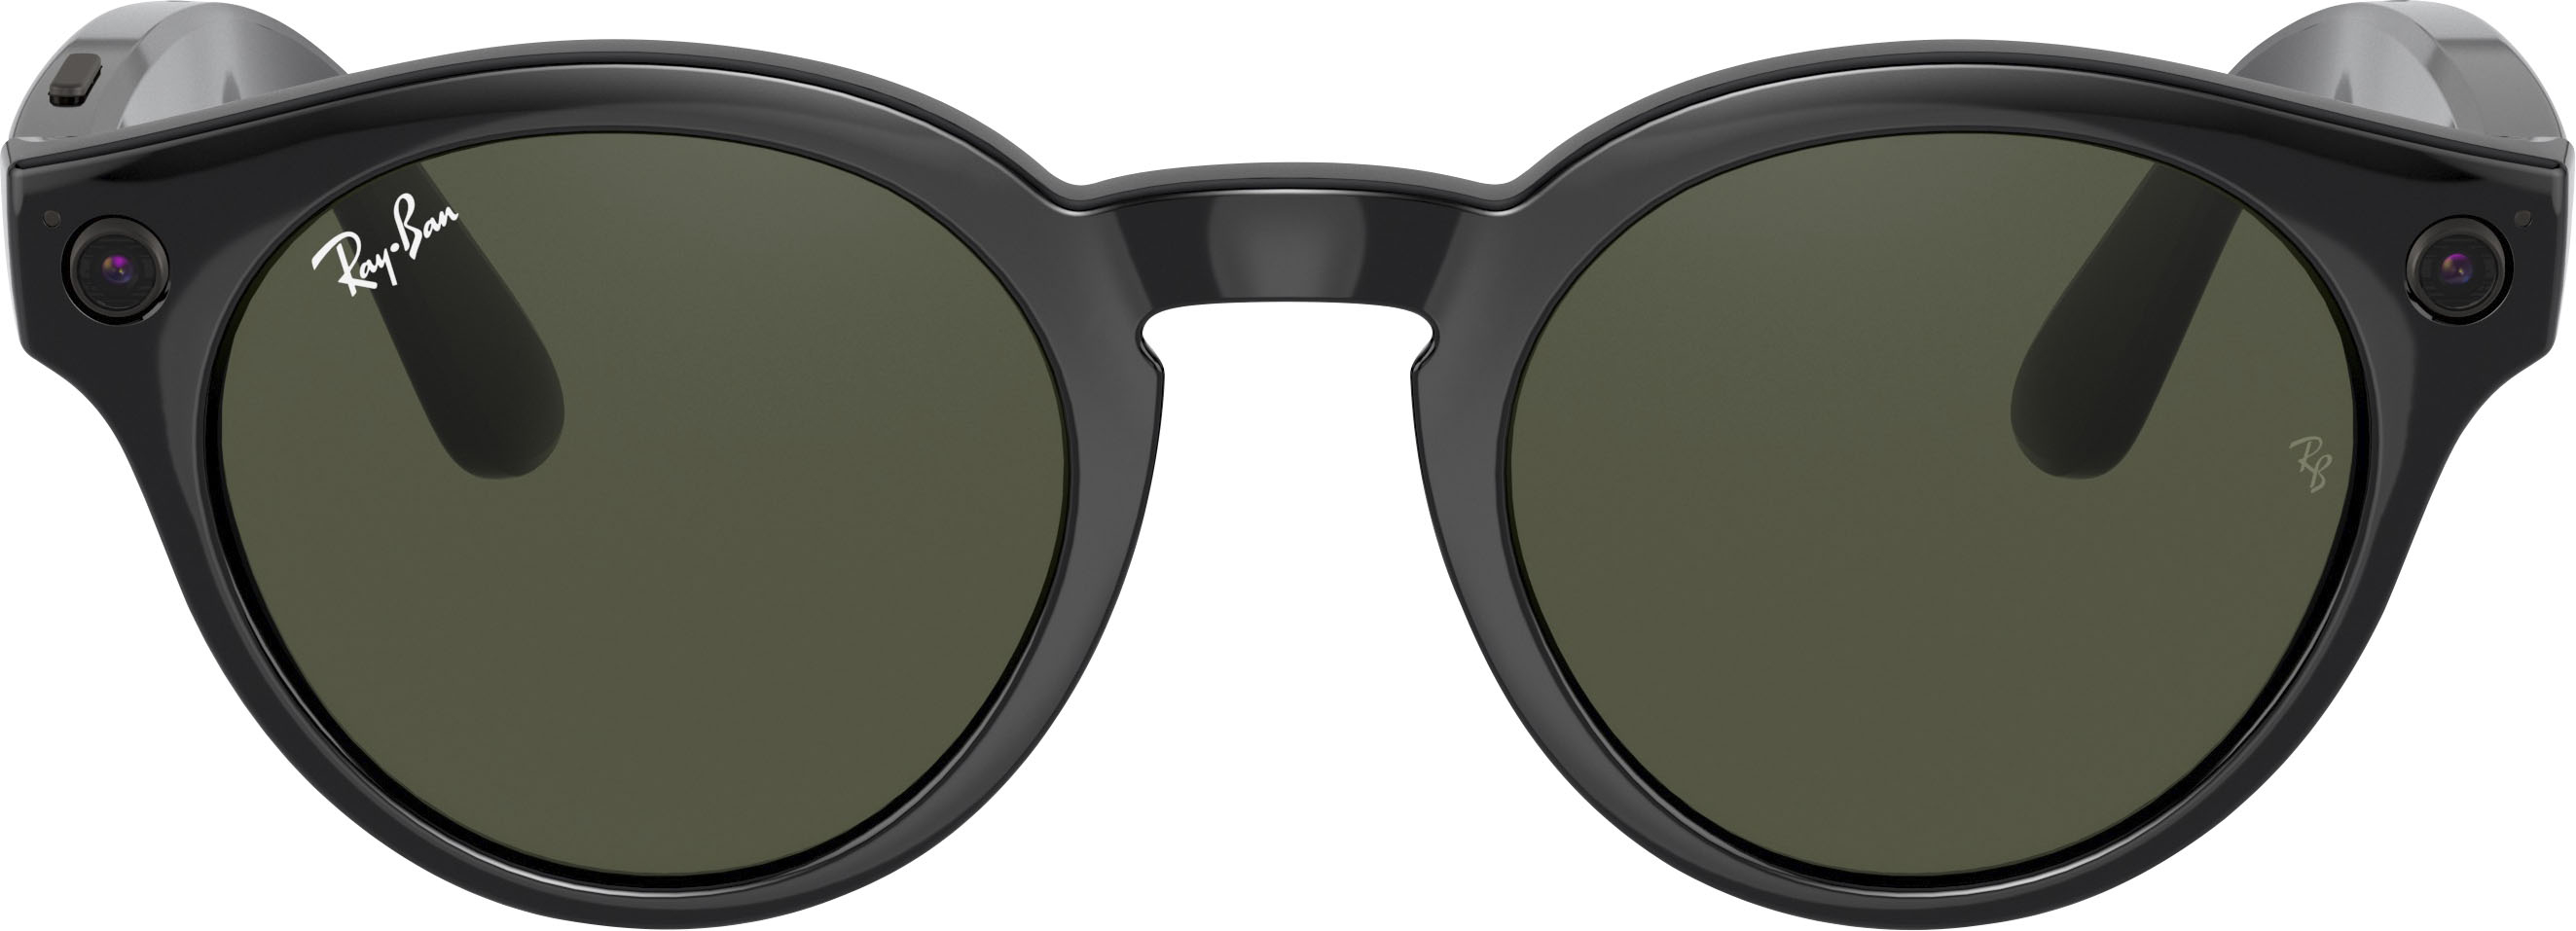 Angle View: Ray-Ban - Stories Round Smart Glasses - Shiny Black/Green